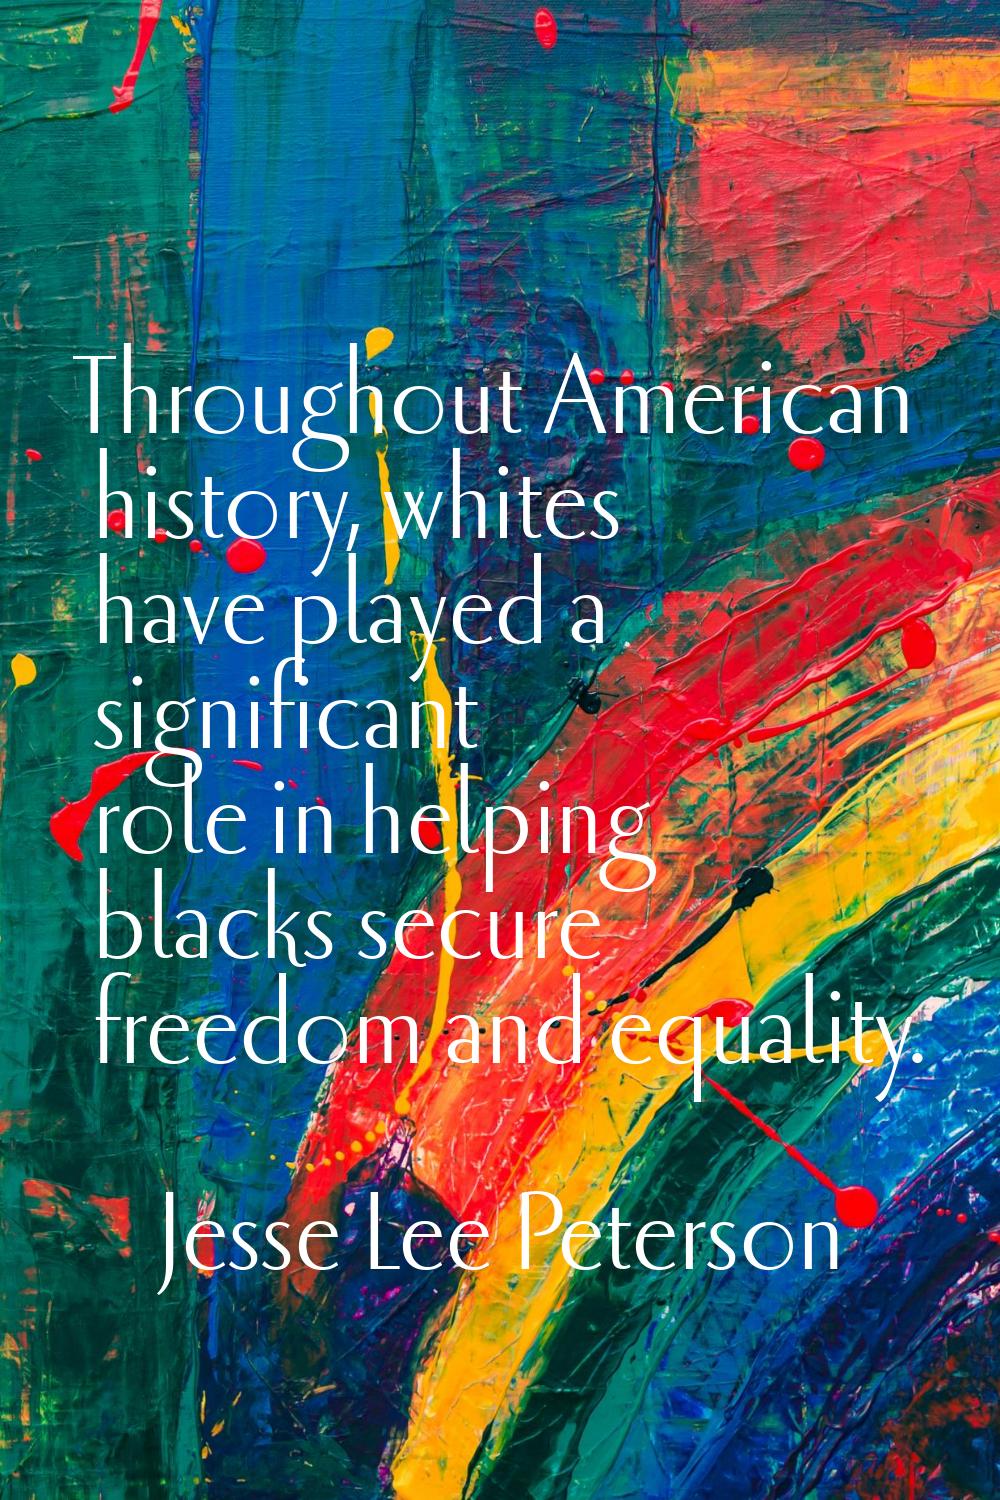 Throughout American history, whites have played a significant role in helping blacks secure freedom